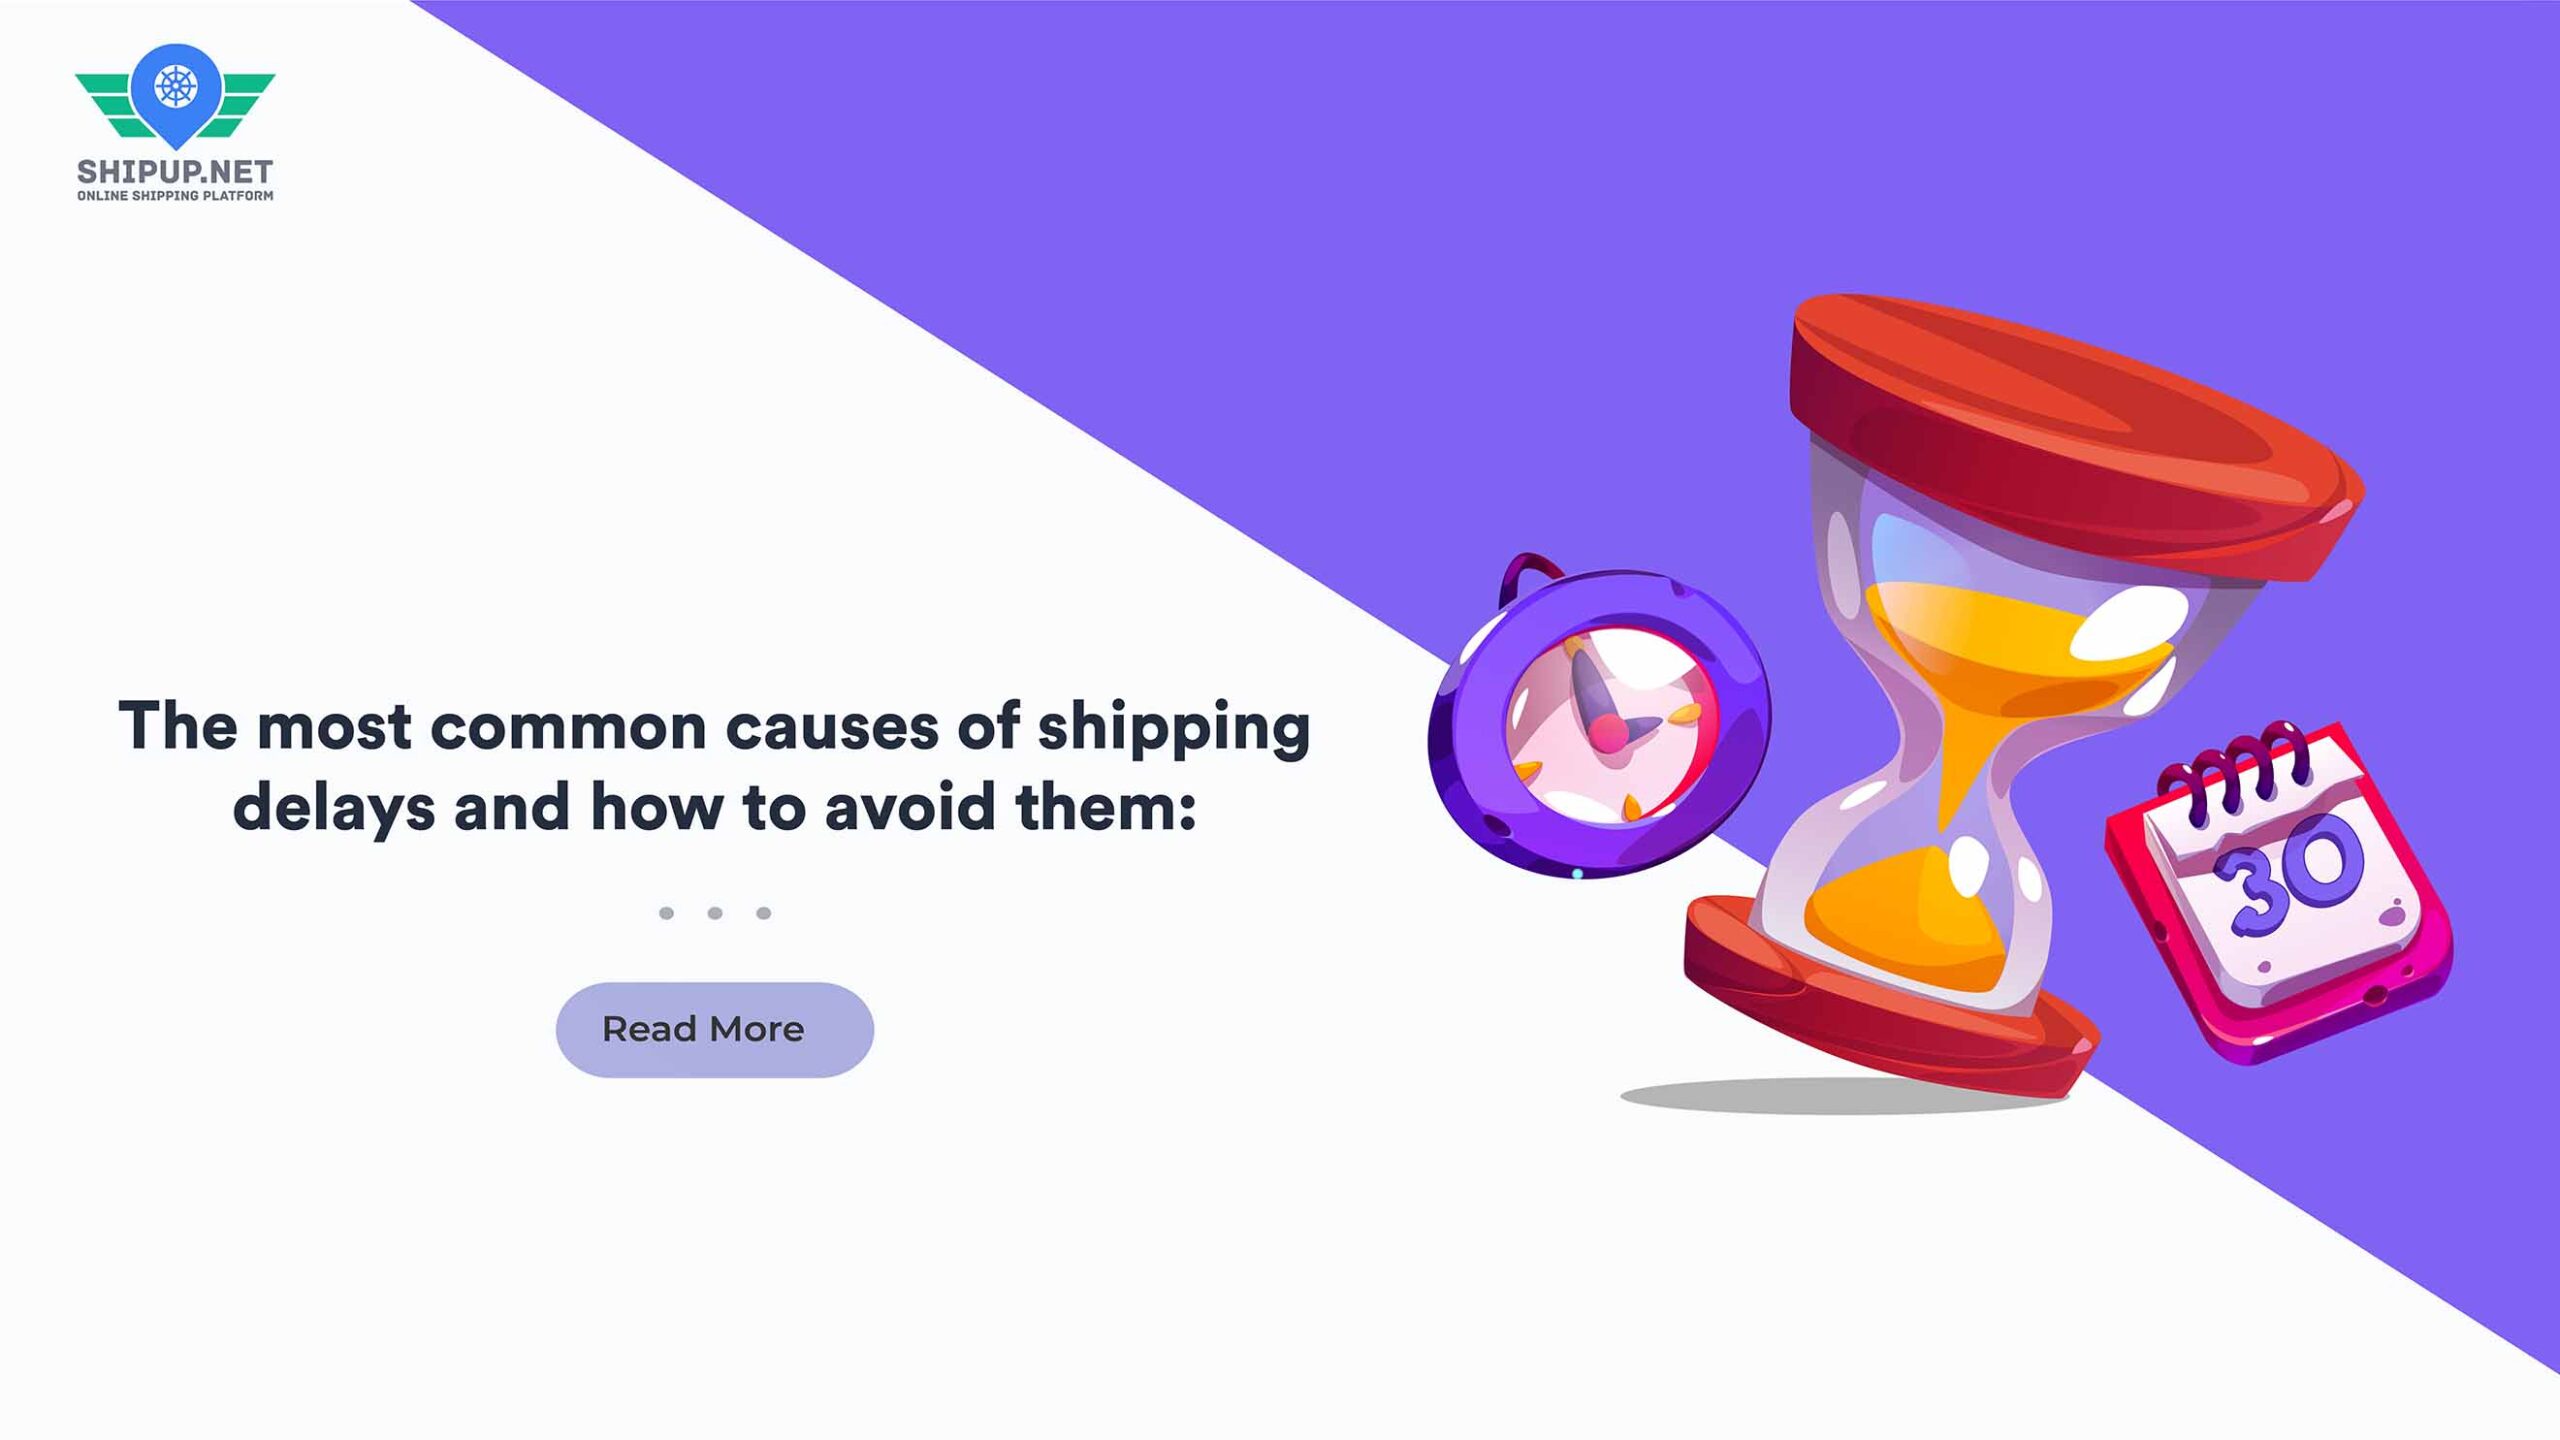 12 Most Common Causes of Shipping Delays and How to Avoid Them